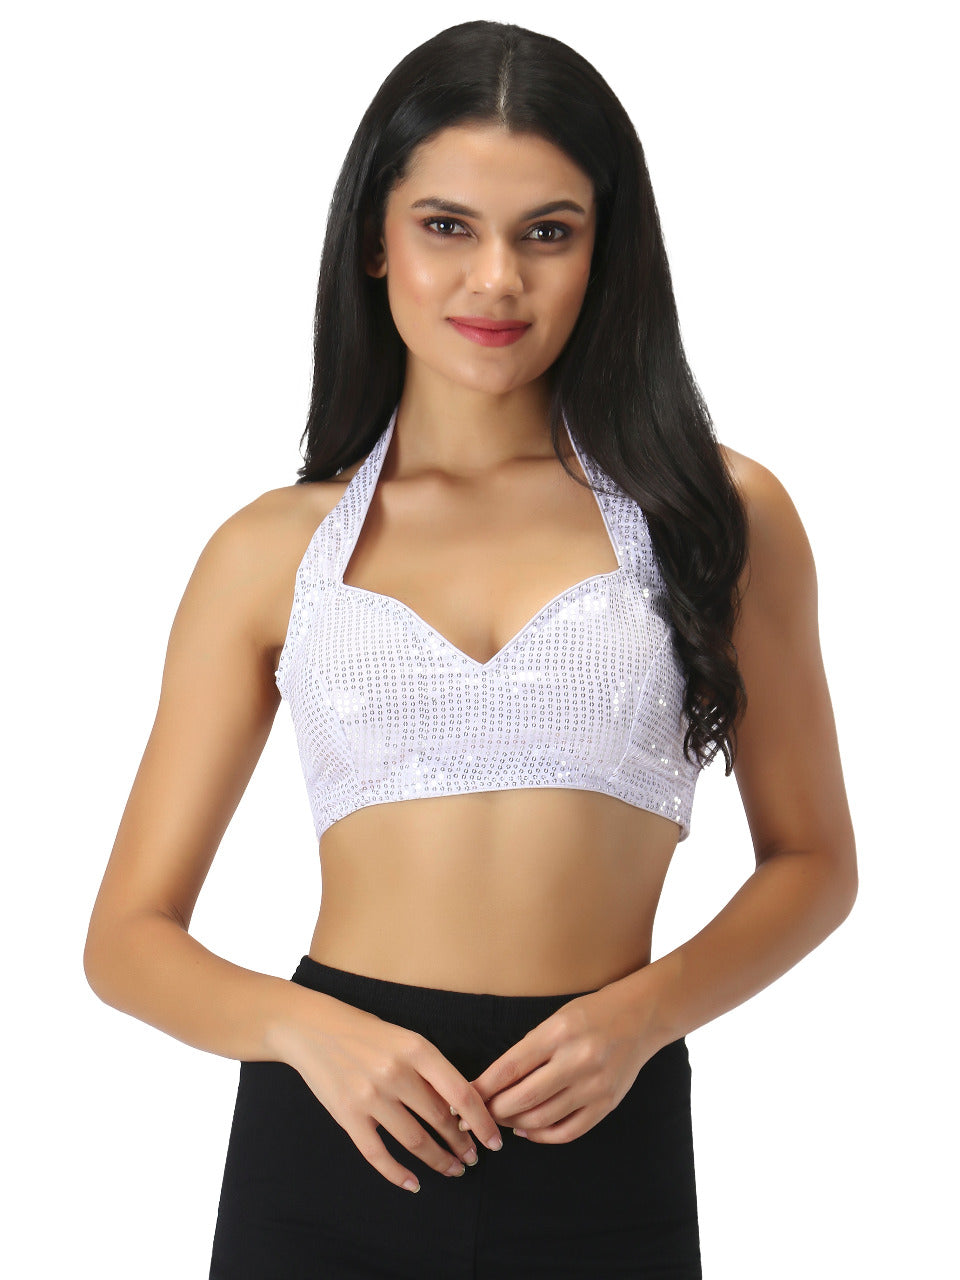 Saree Blouse Top in Shimmering White - Indian Clothing in Denver, CO, Aurora, CO, Boulder, CO, Fort Collins, CO, Colorado Springs, CO, Parker, CO, Highlands Ranch, CO, Cherry Creek, CO, Centennial, CO, and Longmont, CO. Nationwide shipping USA - India Fashion X